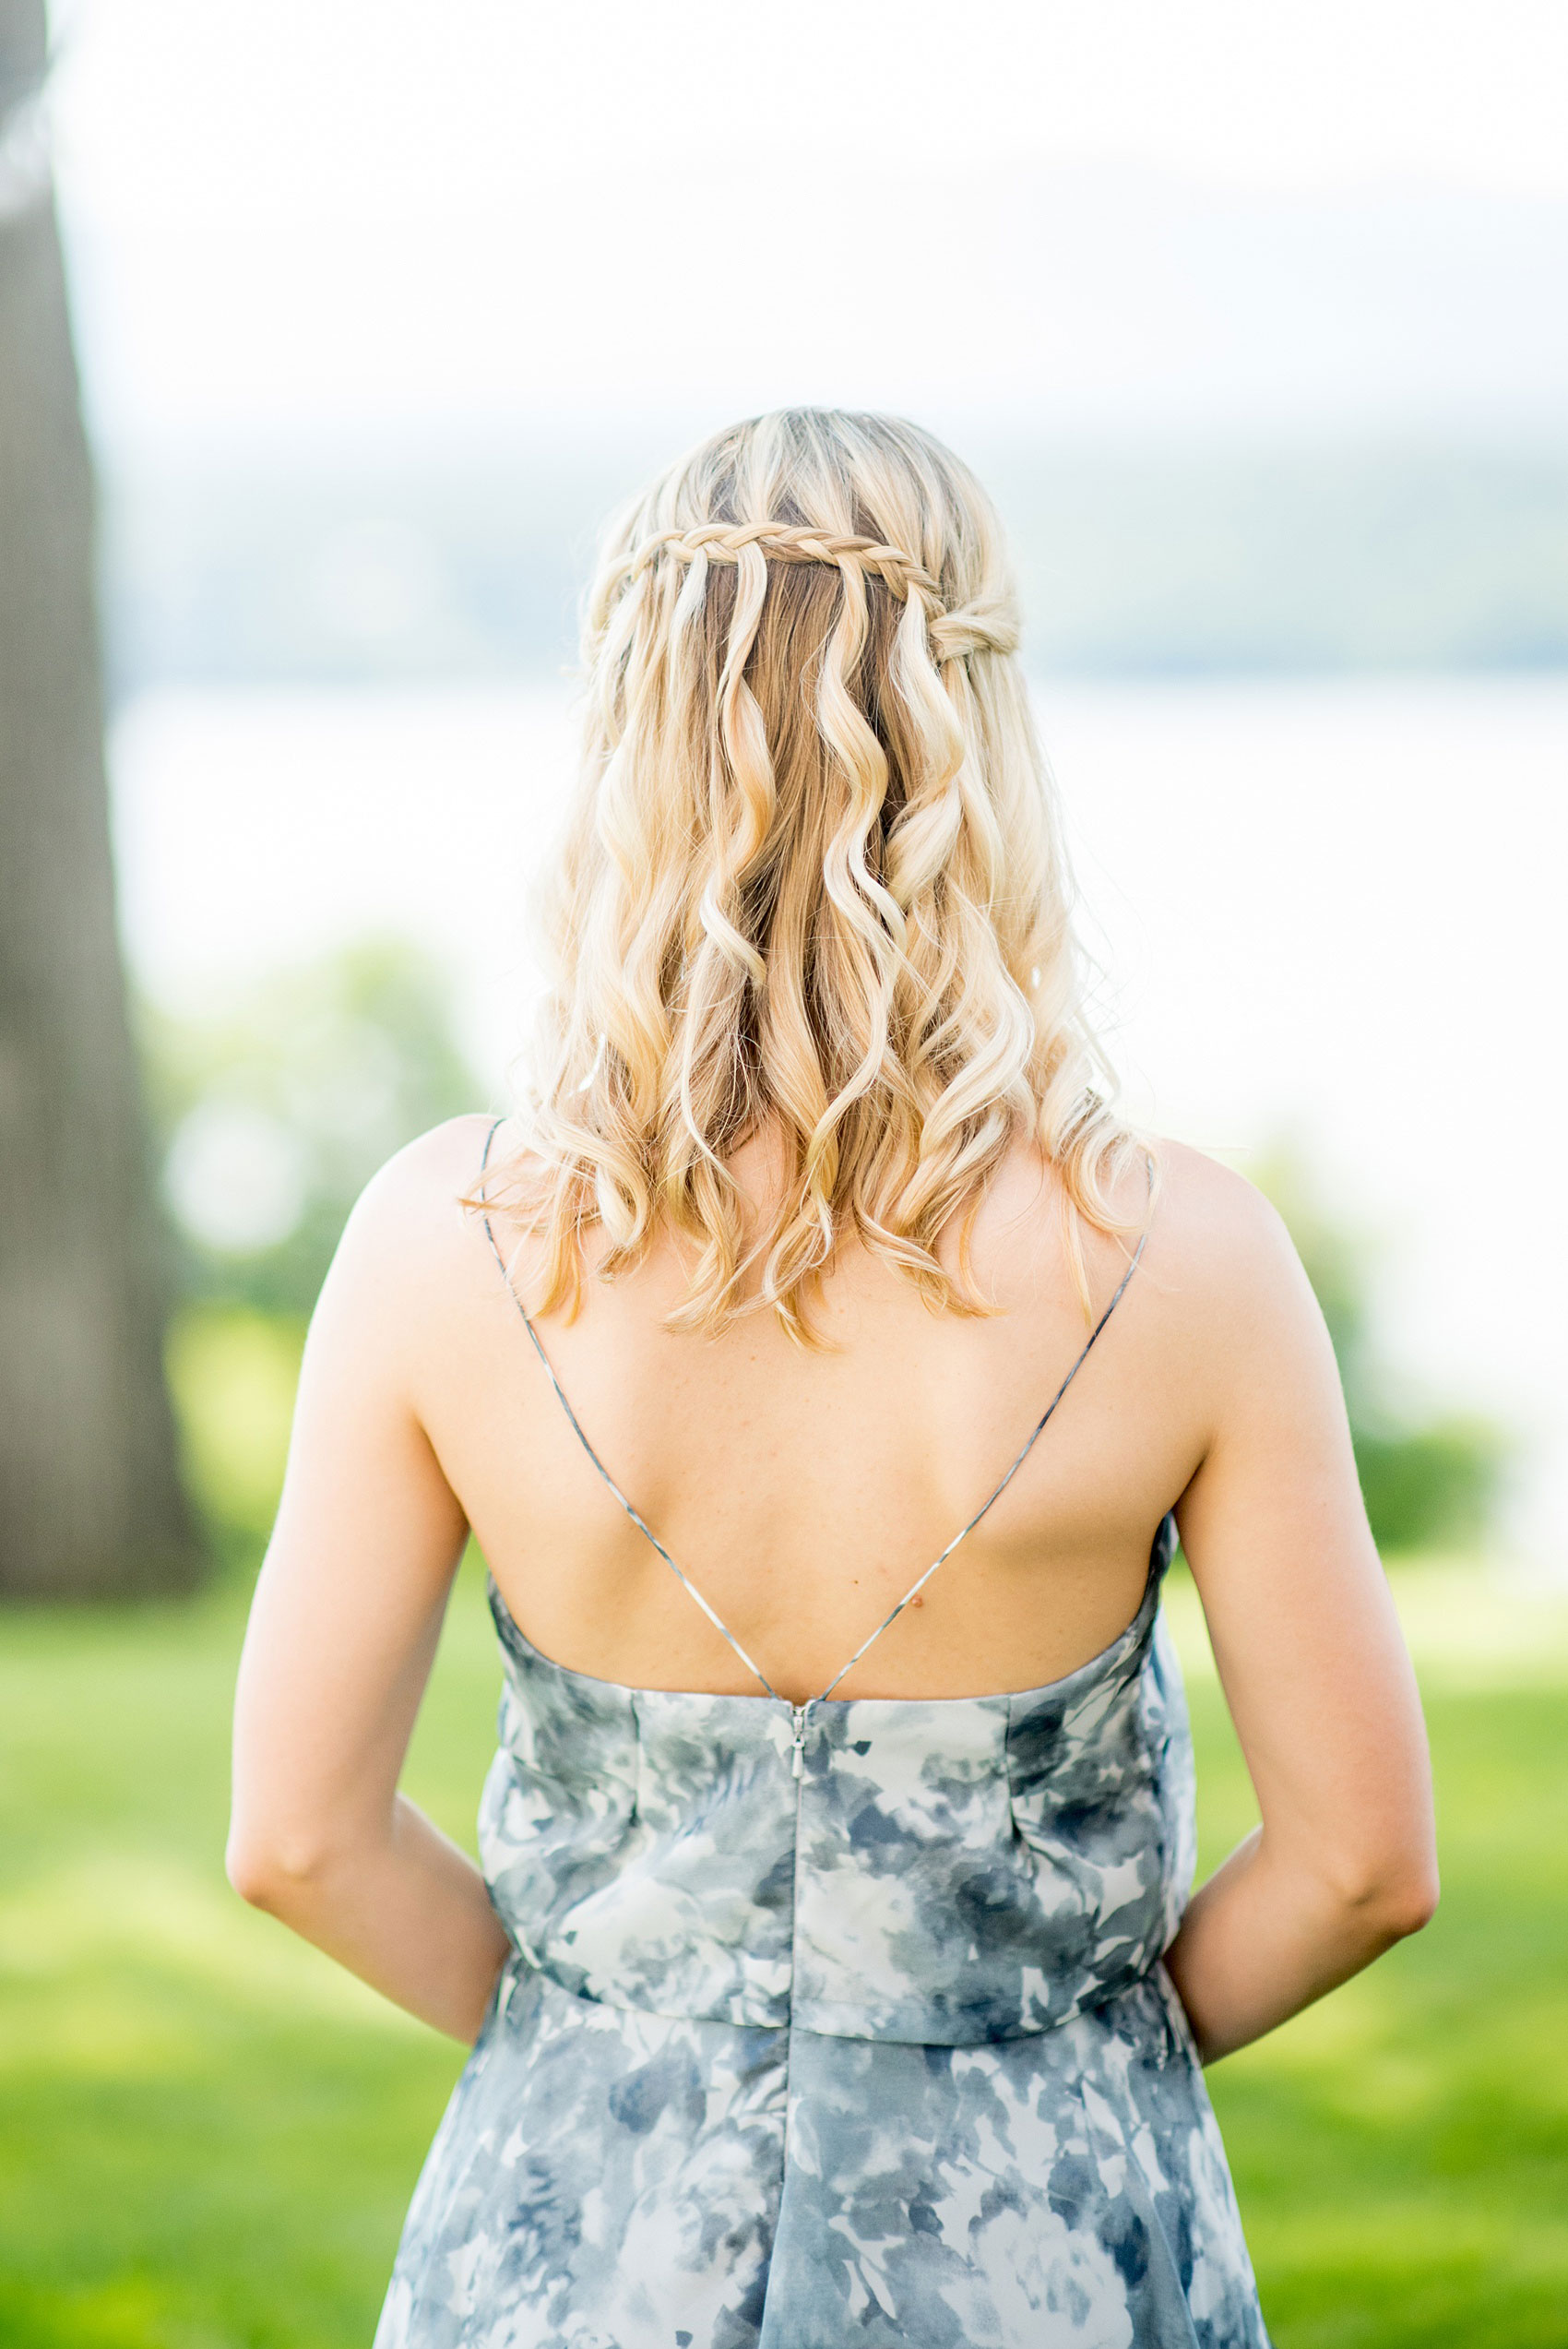 Mikkel Paige Photography photos from a Southwood Estate Wedding in Germantown, New York in the Hudson Valley. Picture of the maid of honor in a blue floral gown with her cascading waterfall braid hair style.